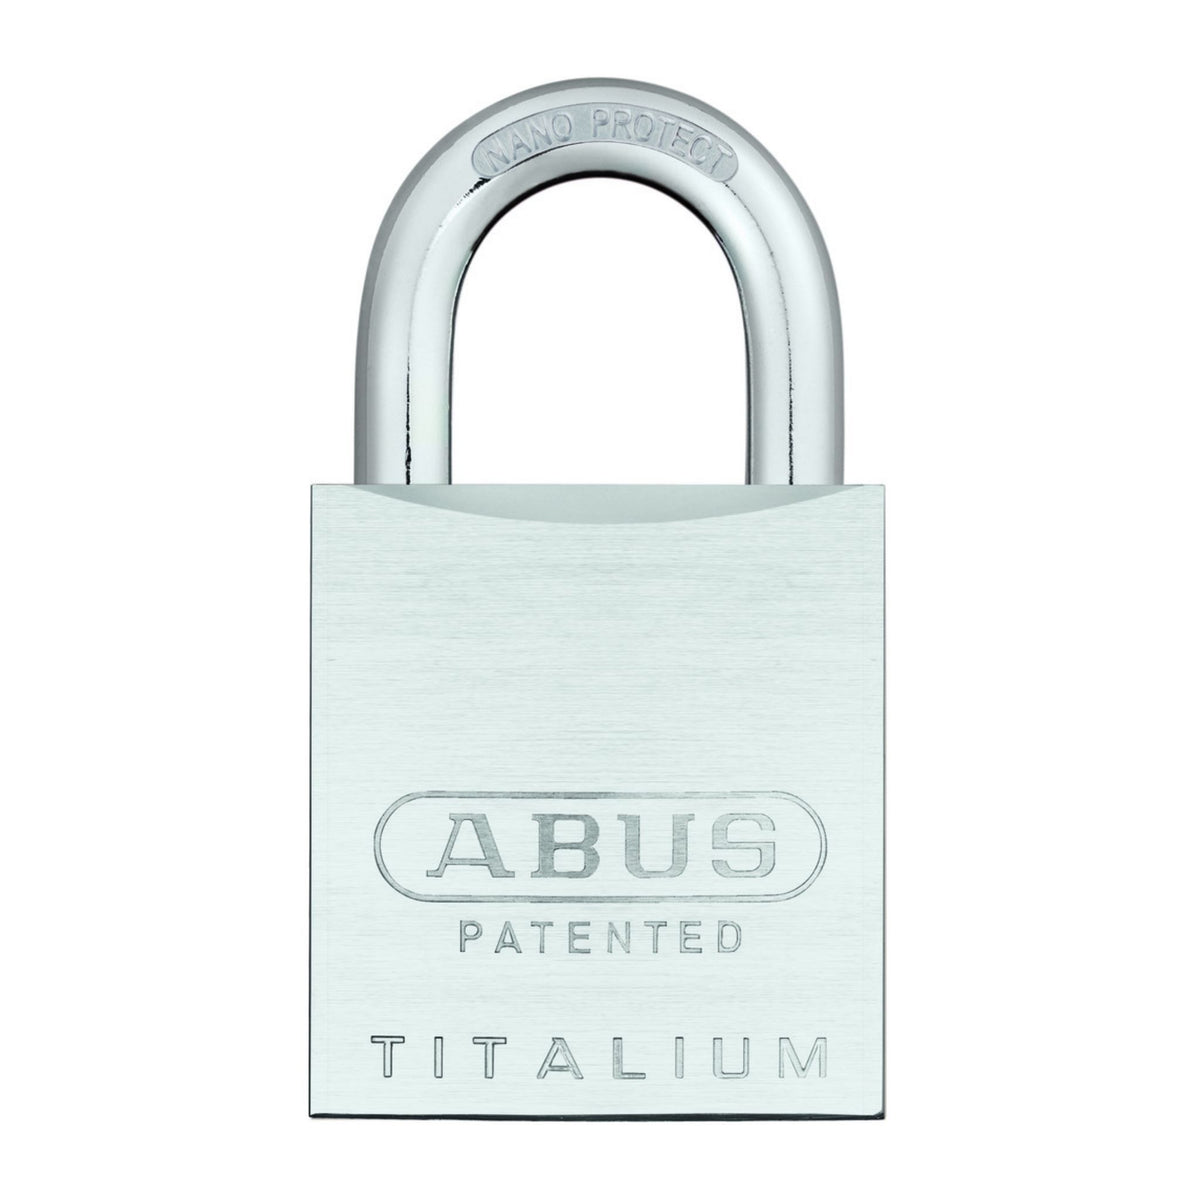 Abus 83AL/45-410 Titalium Brushed Aluminum (Silver) Safety Lock with Corbin L4 Keyway - The Lock Source